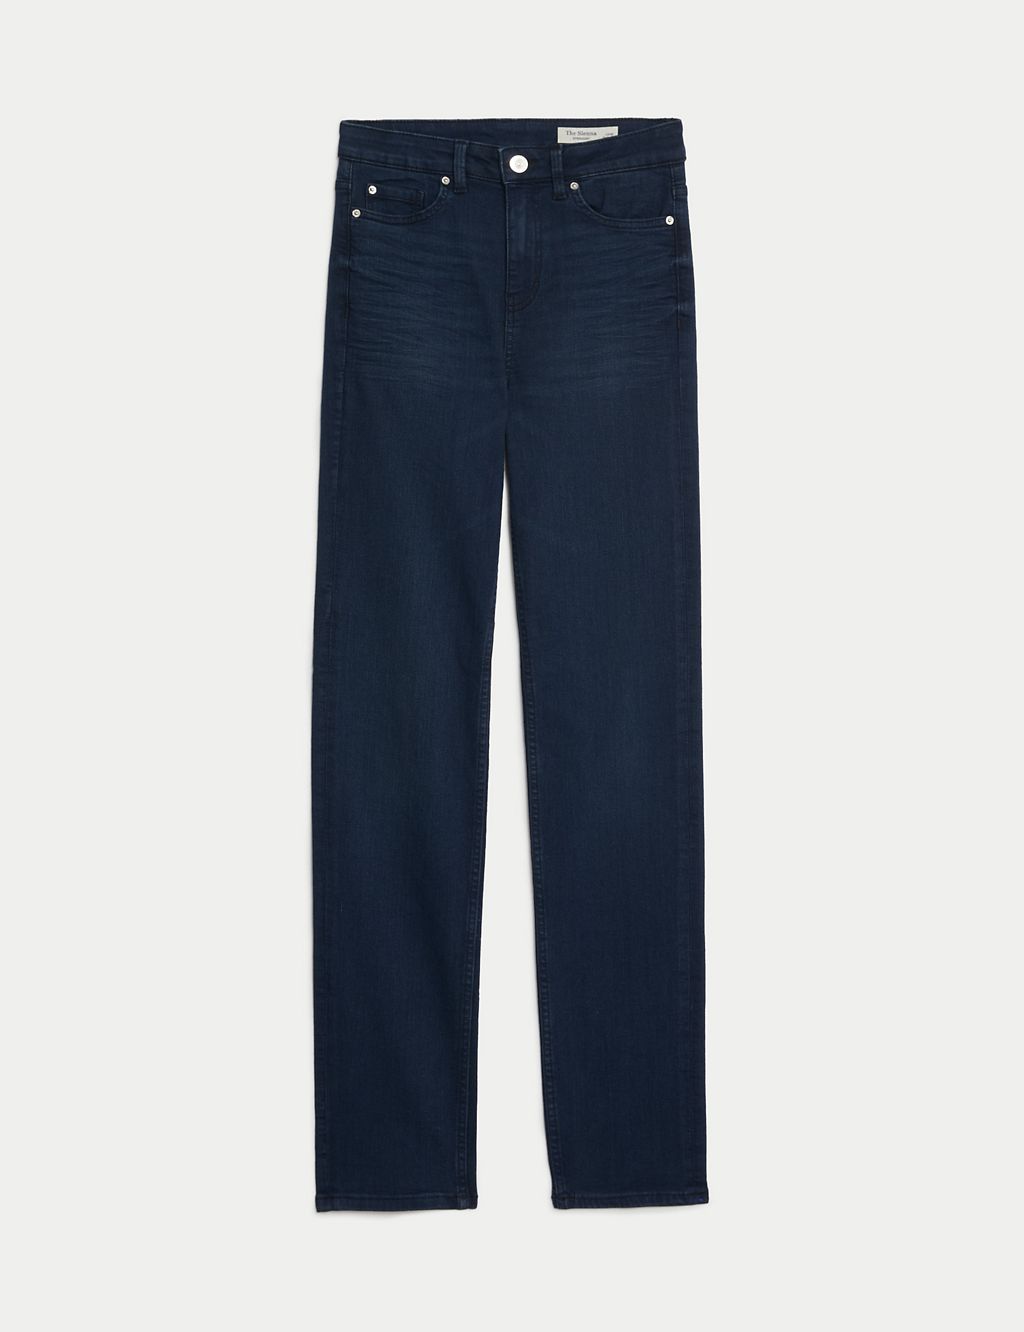 Sienna Straight Leg Jeans with Stretch 1 of 6